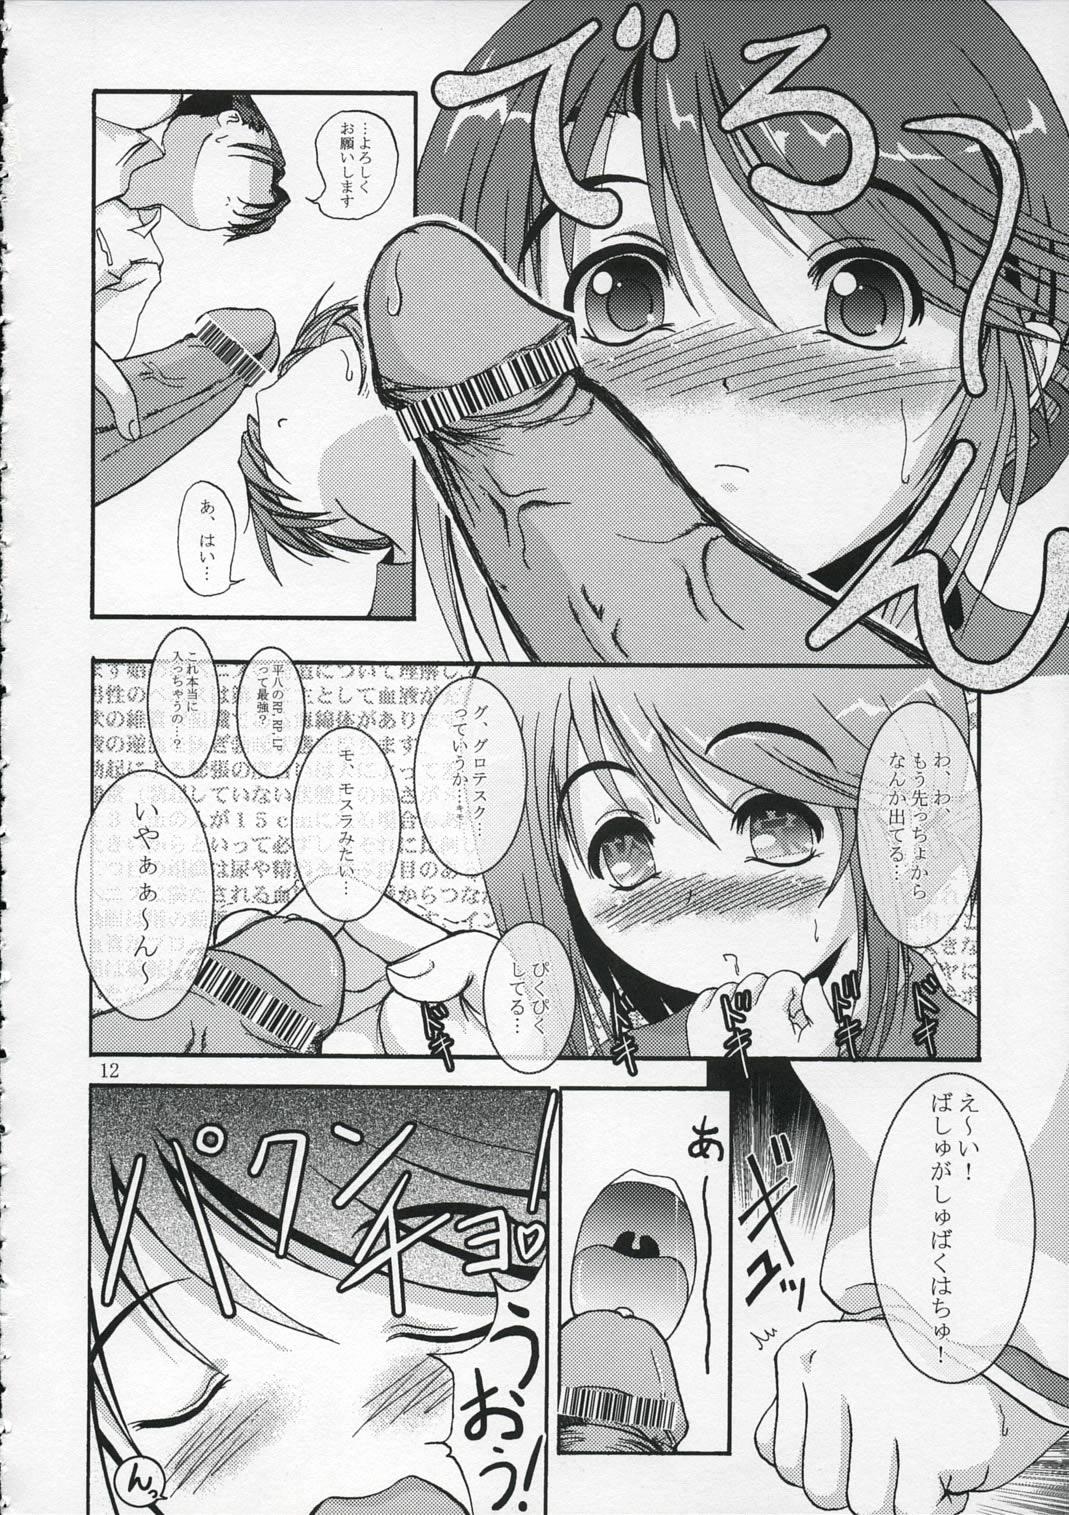 Hot Blow Jobs DoHearts 1 Onegai Iincho - Toheart2 Close Up - Page 11